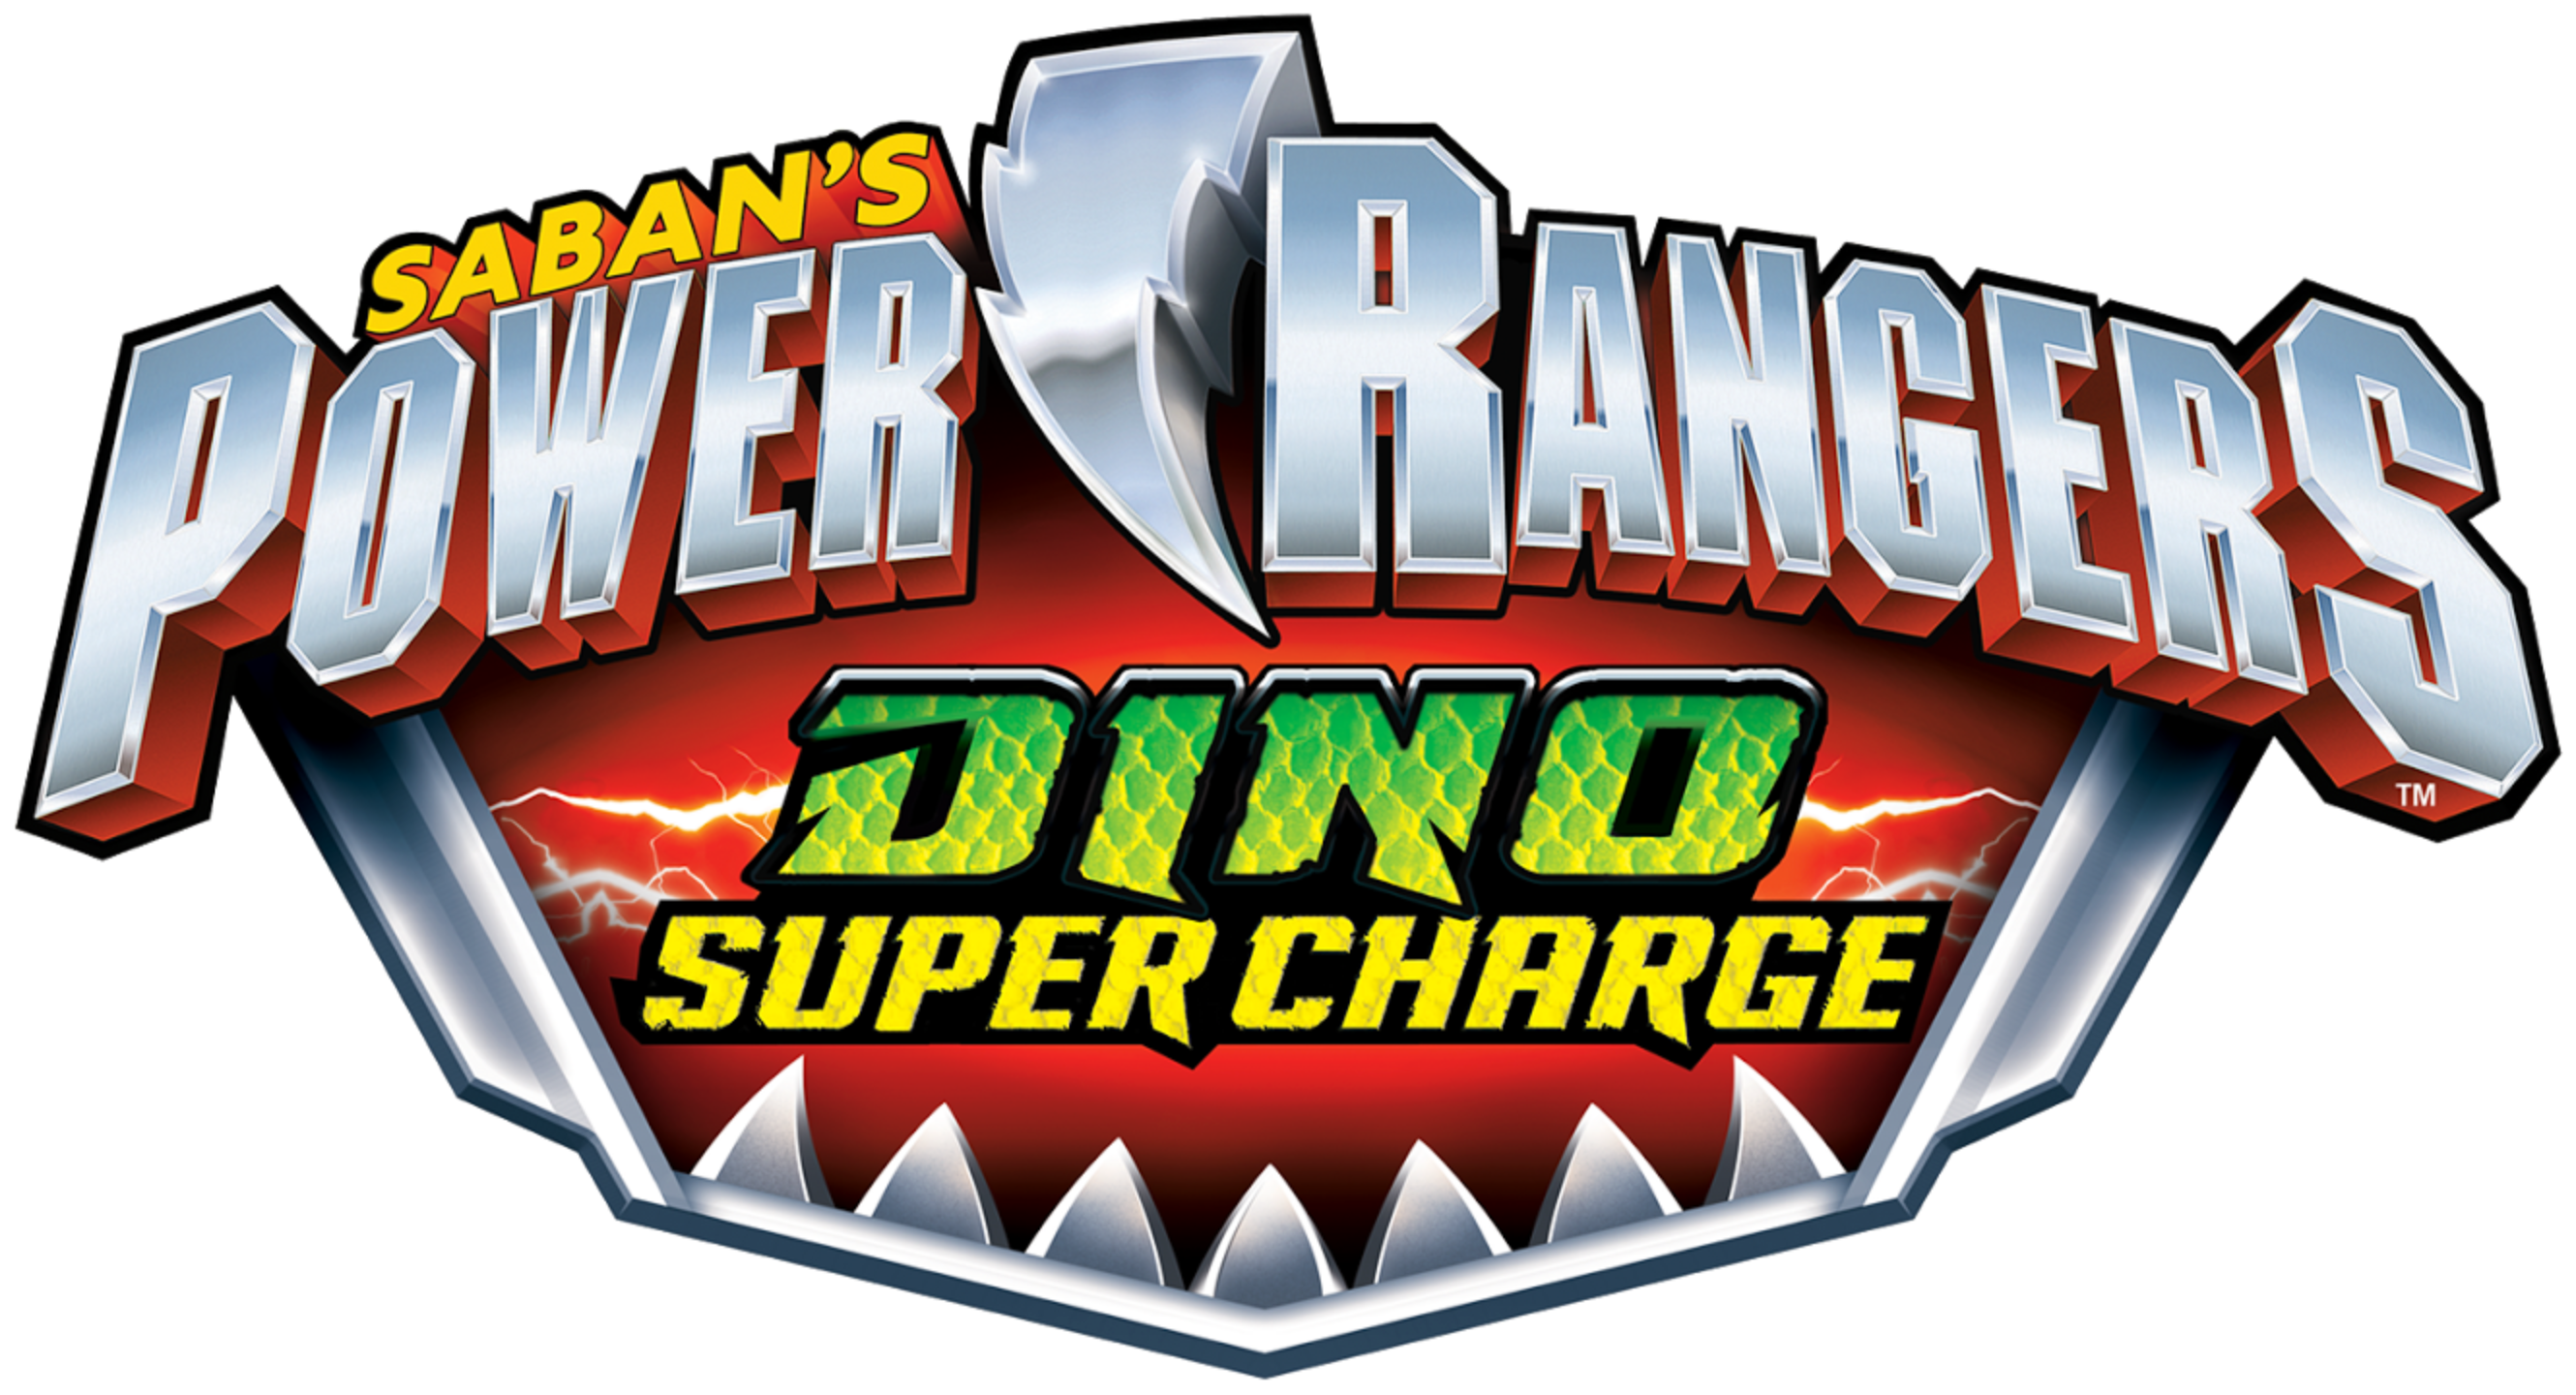 Power Rangers Dino Super Charge (5 DVDs Box Set)